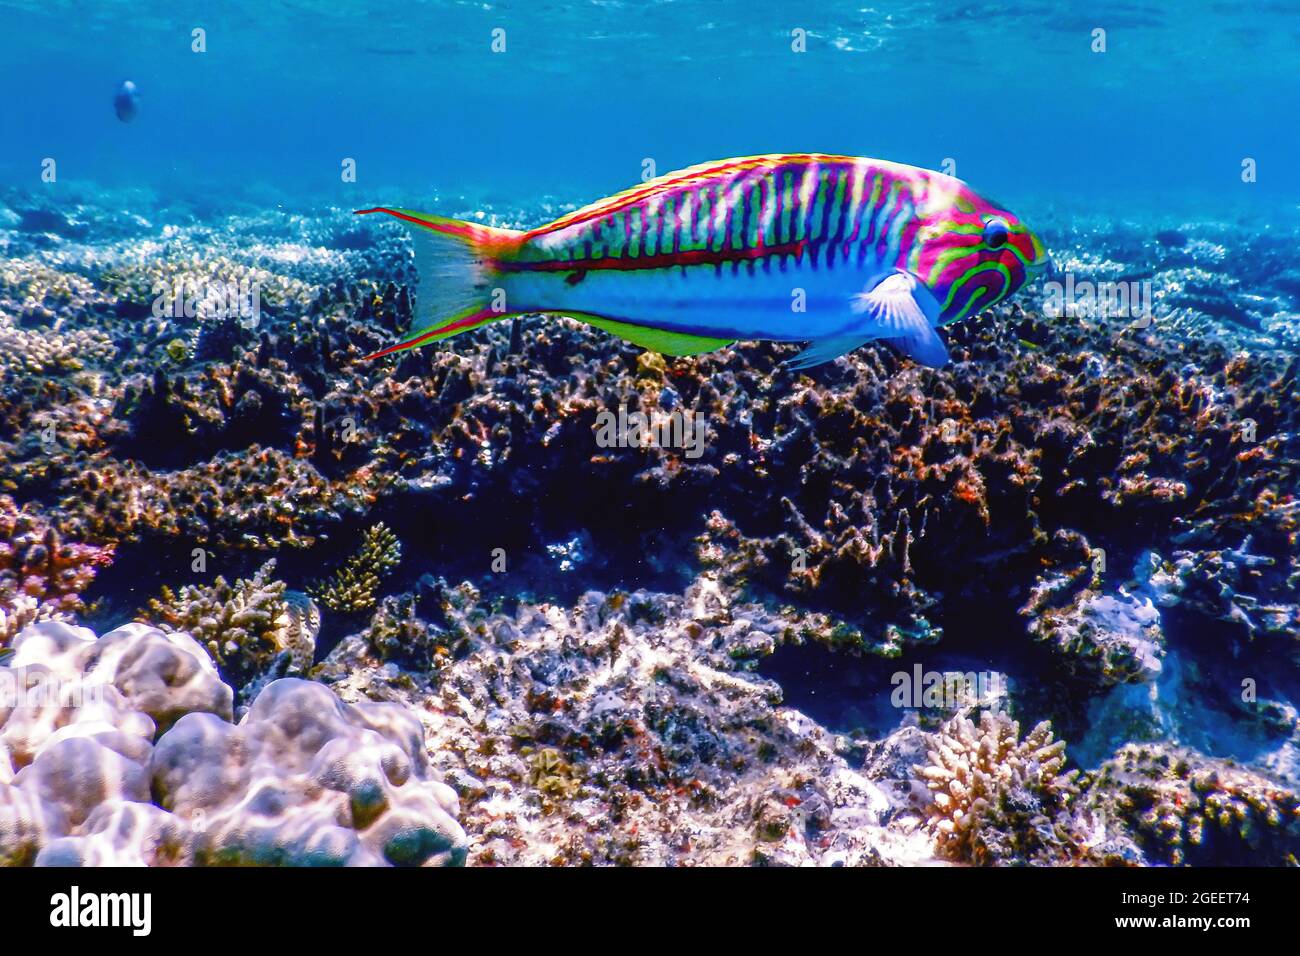 Klunzinger wrasse (Thalassoma rueppellii) Coral fish, Tropical waters, Marine life Stock Photo